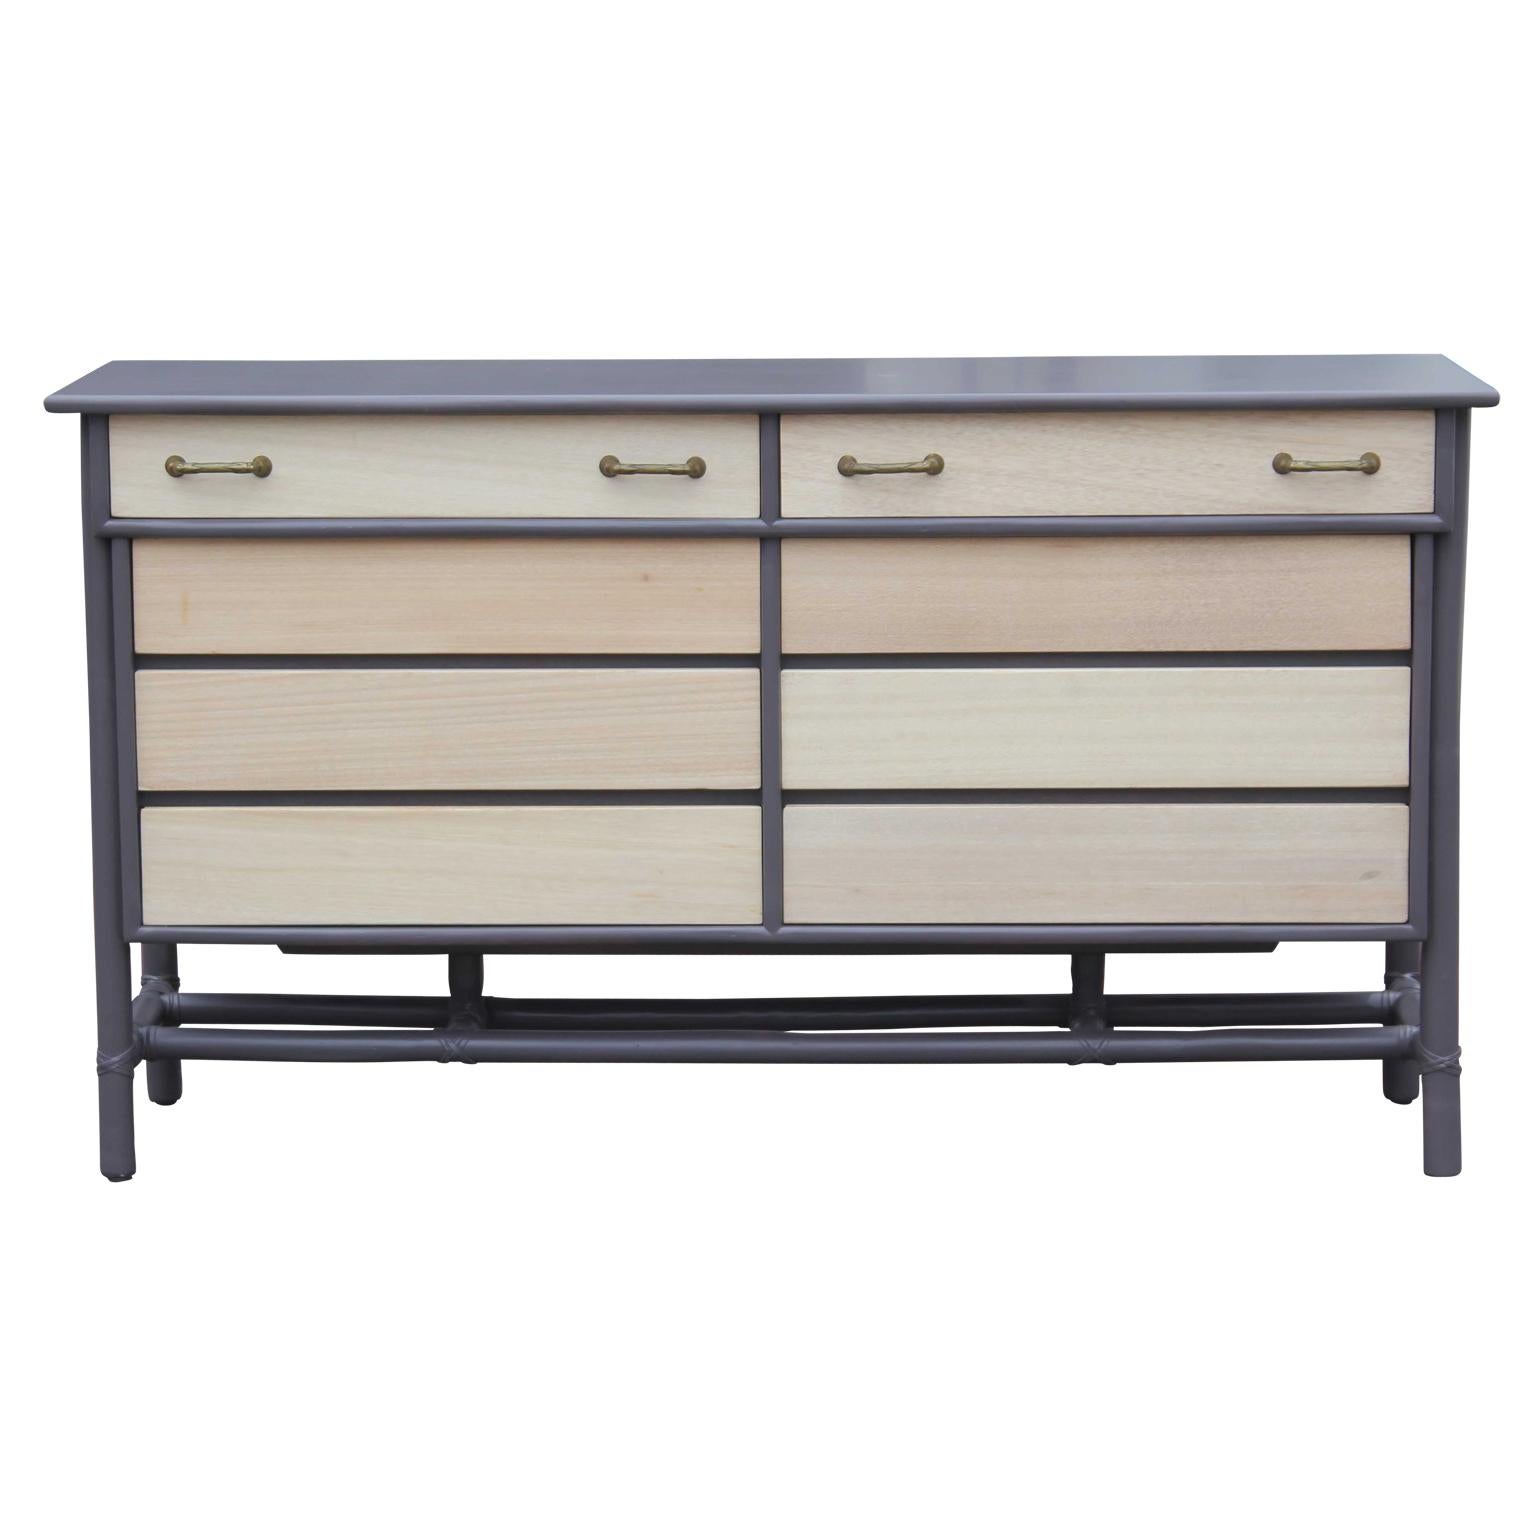 Lovely refinished eight-drawer grey and natural finish dresser with brass handles and faux bamboo flare by McGuire.